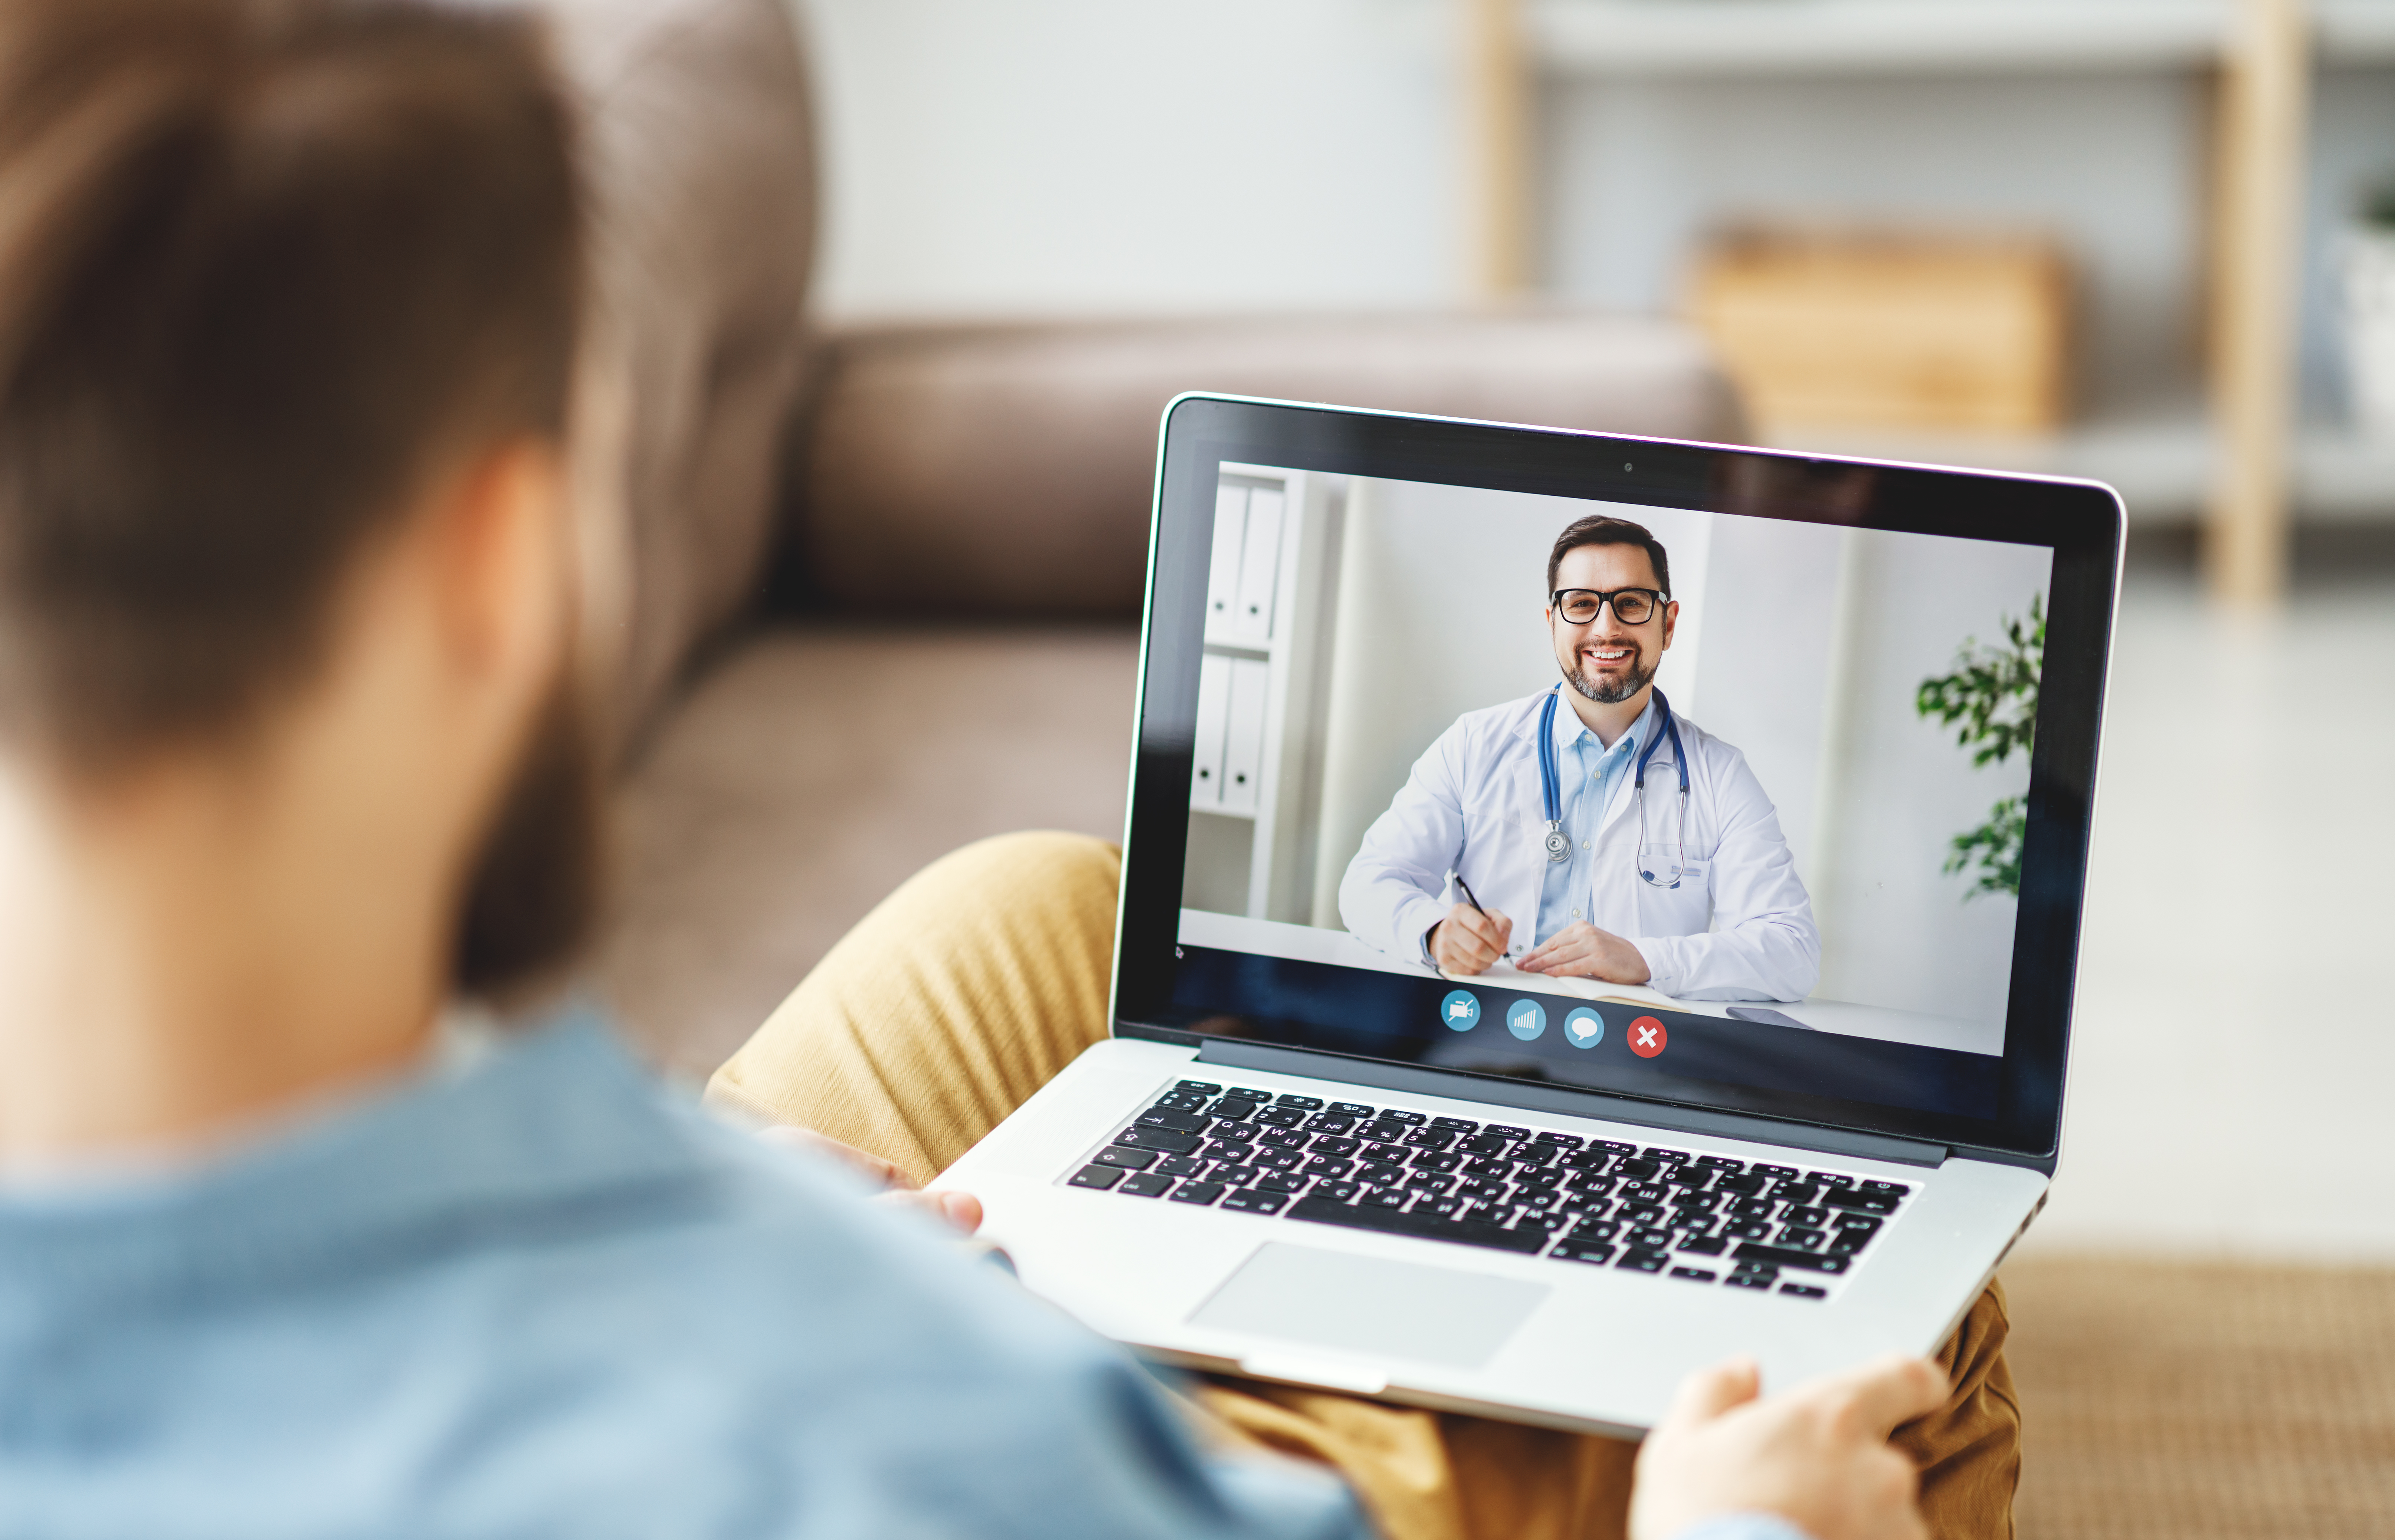 Video conference video chat with a doctor online